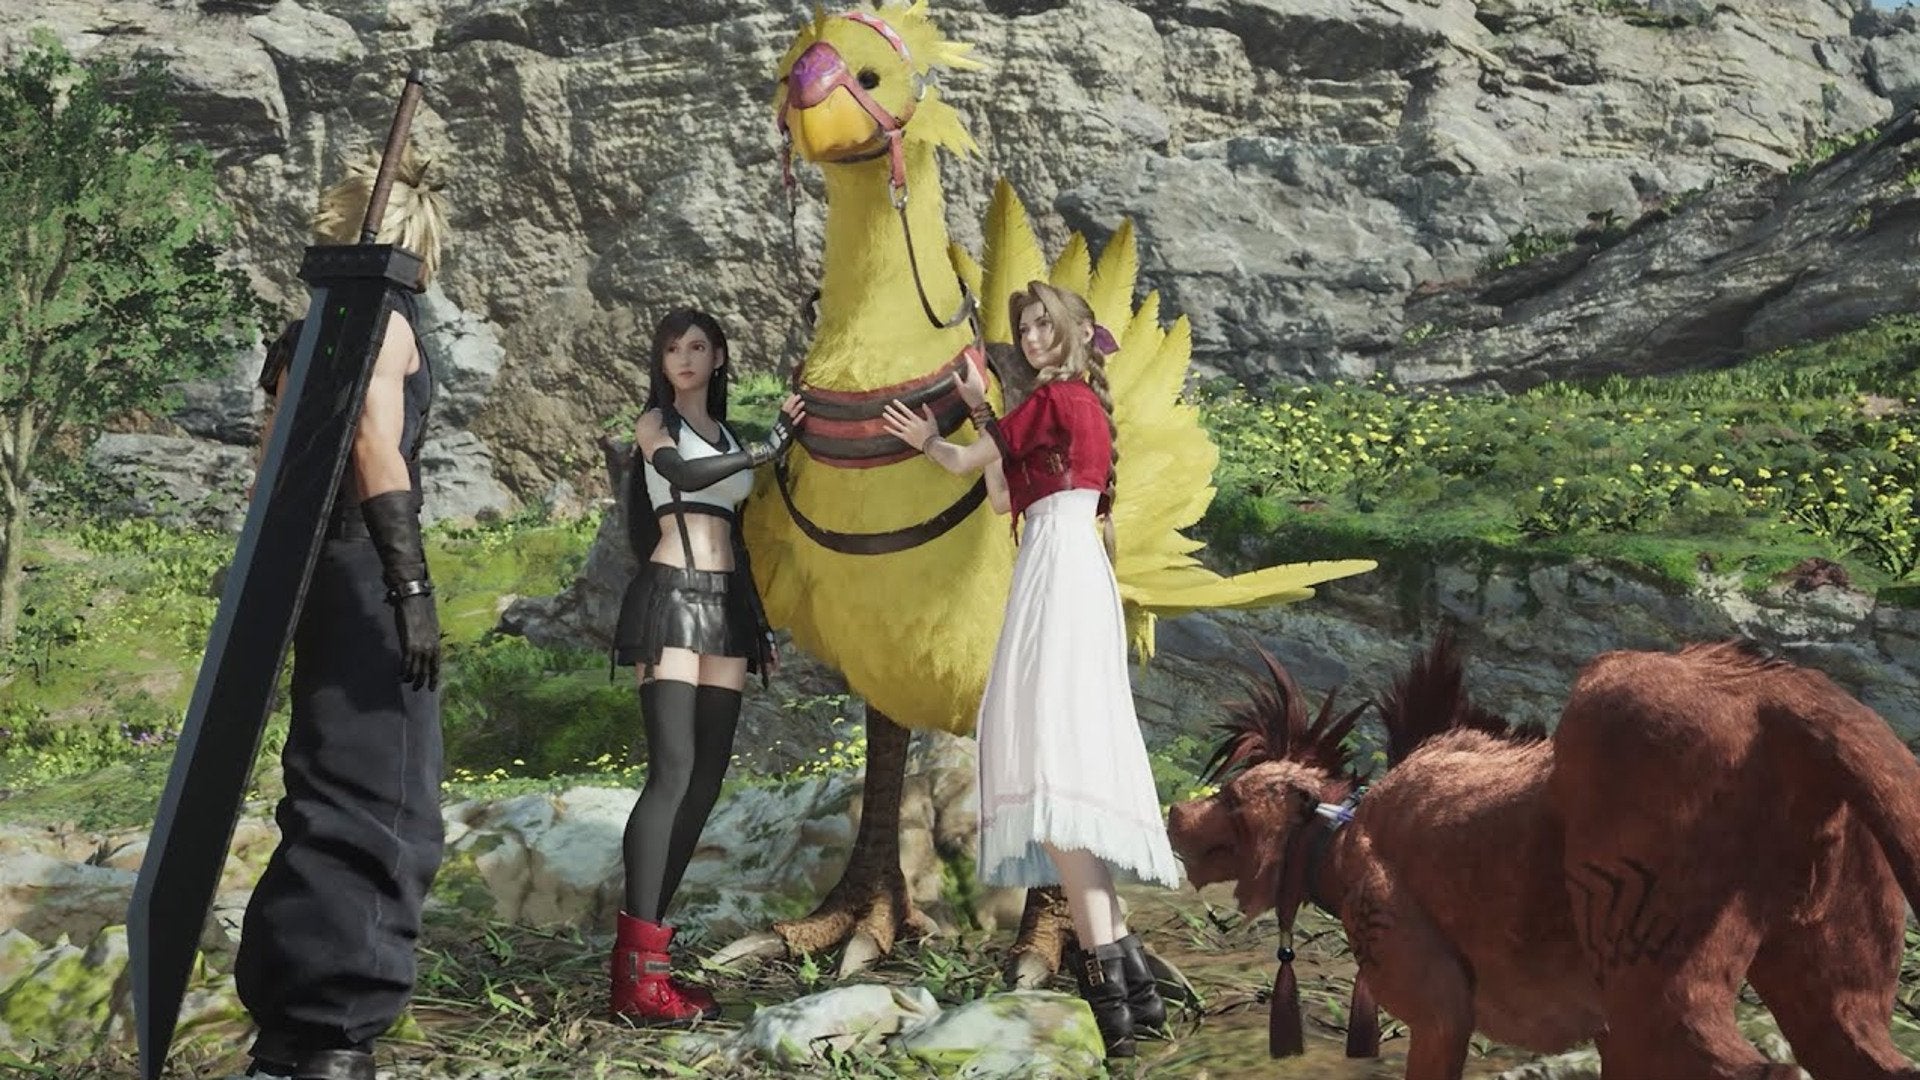 Cloud, Aerith, Tifa, and Red XIII with a Chocobo in Final Fantasy VII Rebirth.